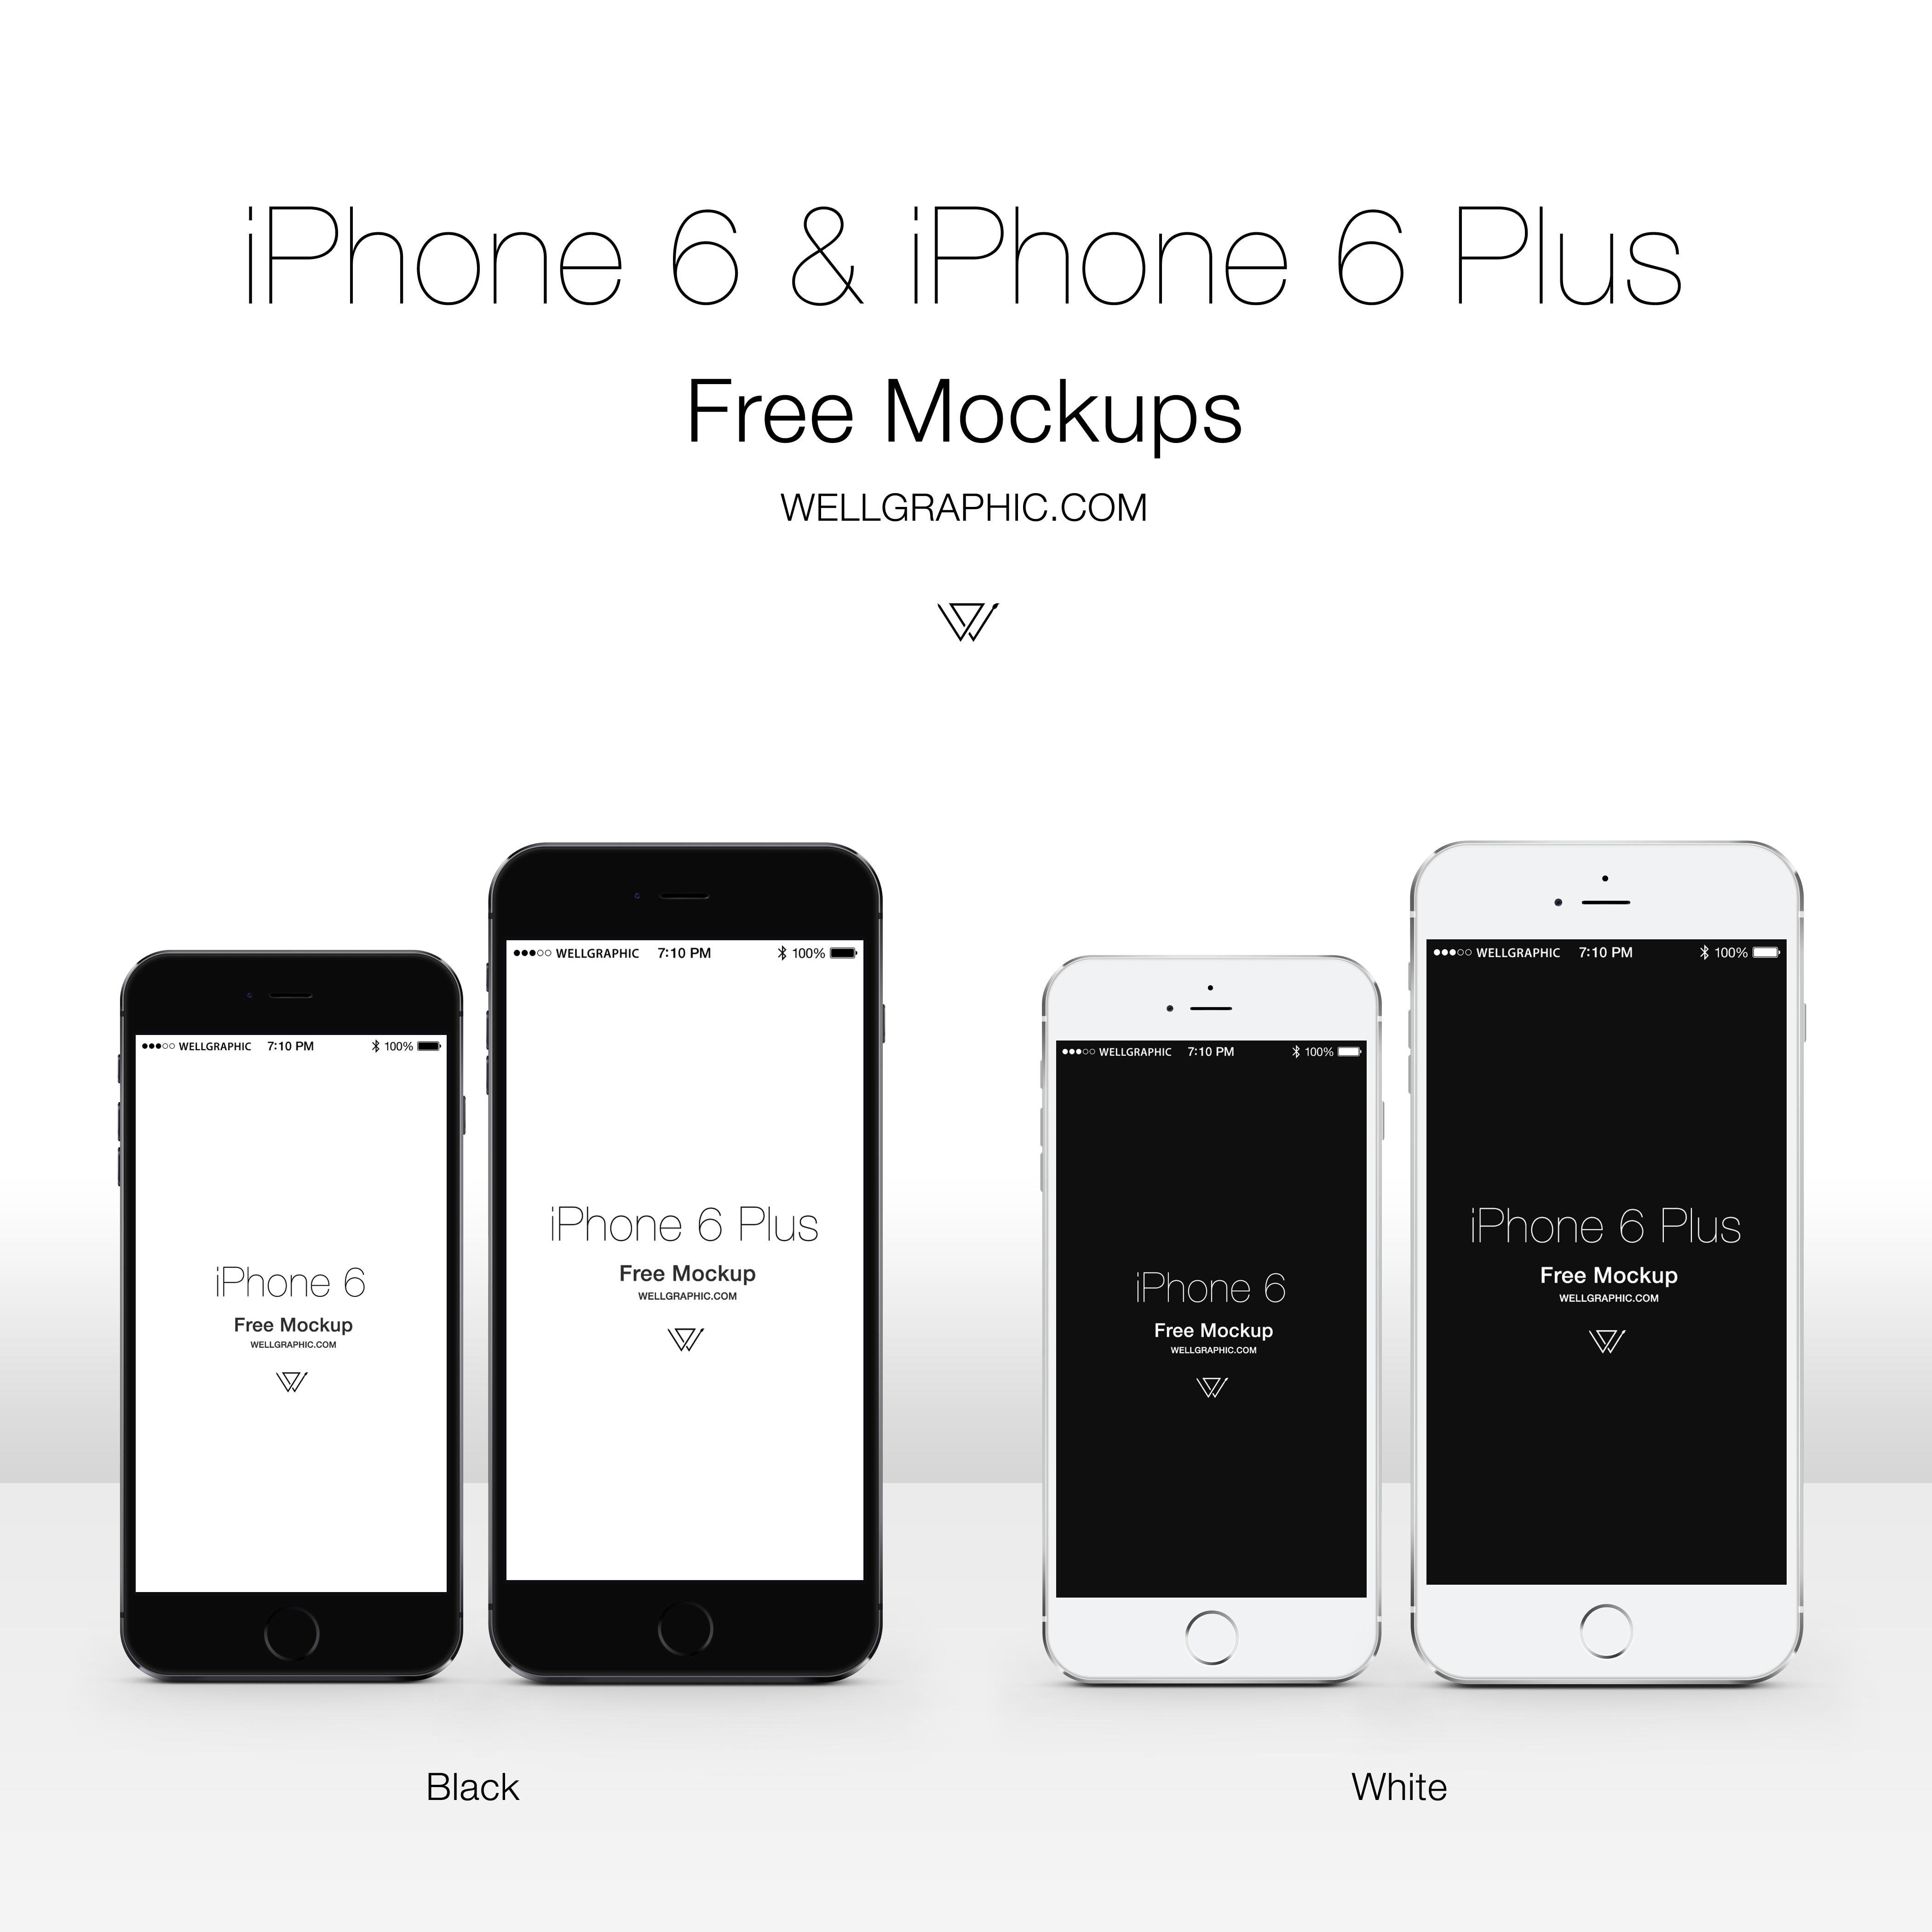 Apple iPhone And Plus Mockup Psd By Wellgraphic On